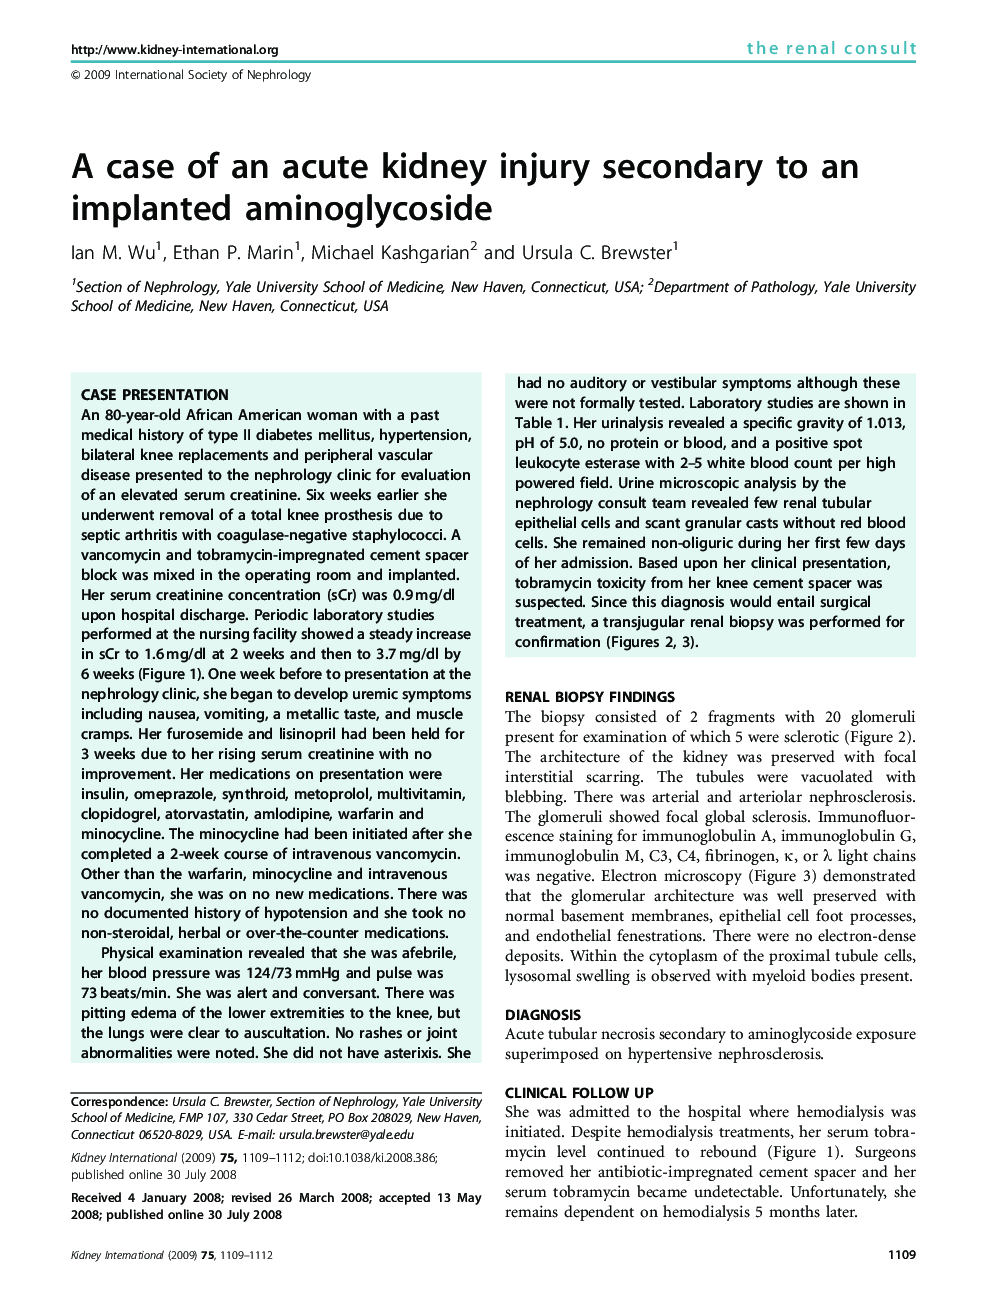 A case of an acute kidney injury secondary to an implanted aminoglycoside